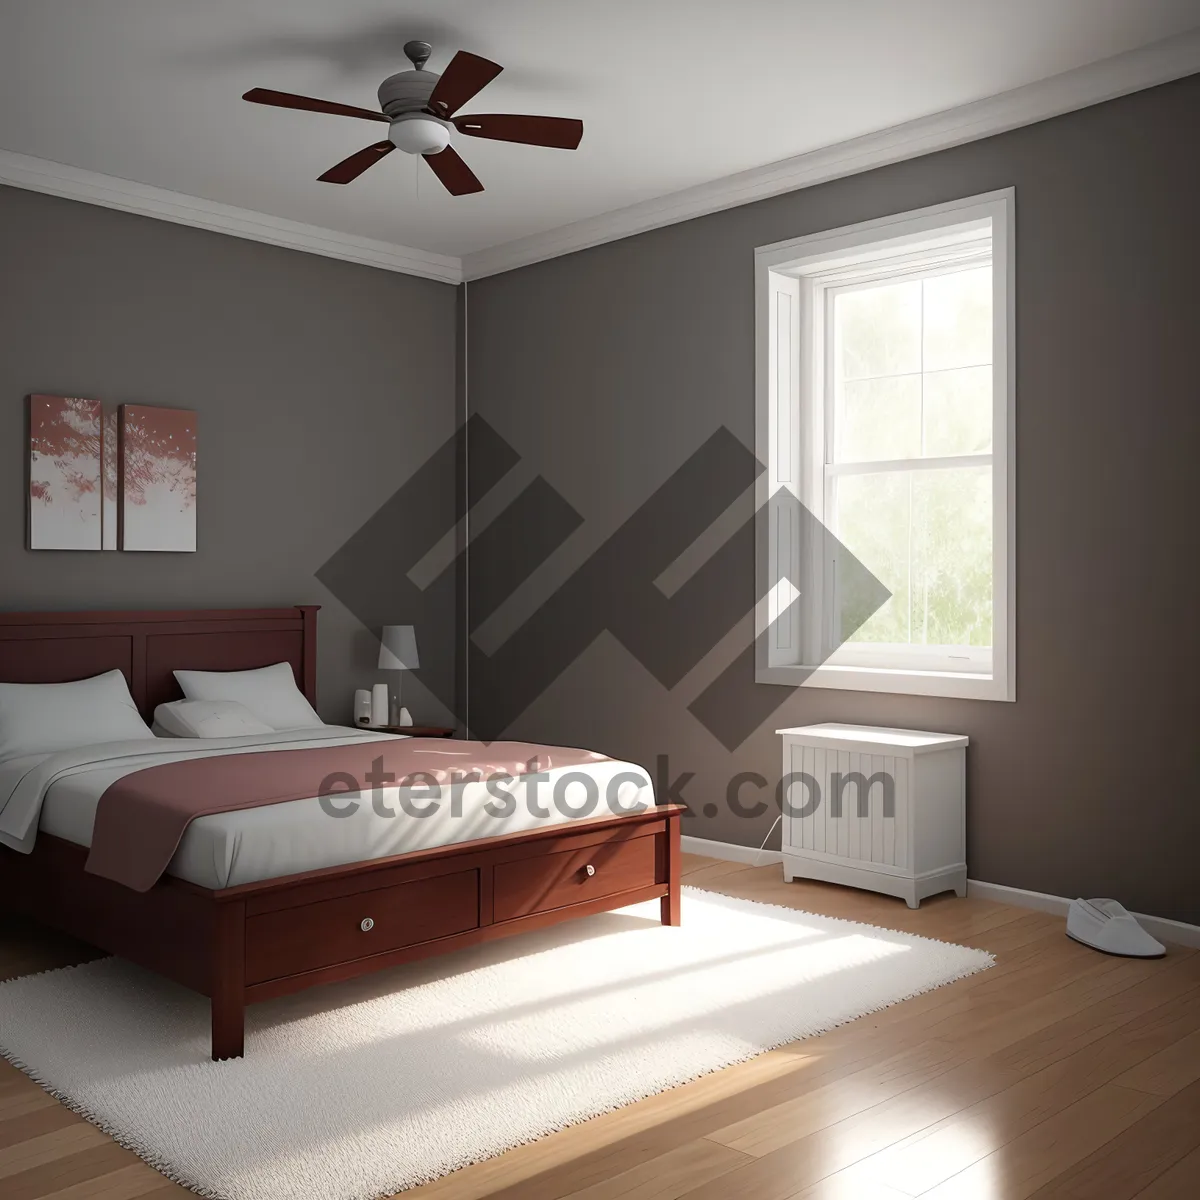 Picture of Modern Interior Bedroom with Cozy Furniture